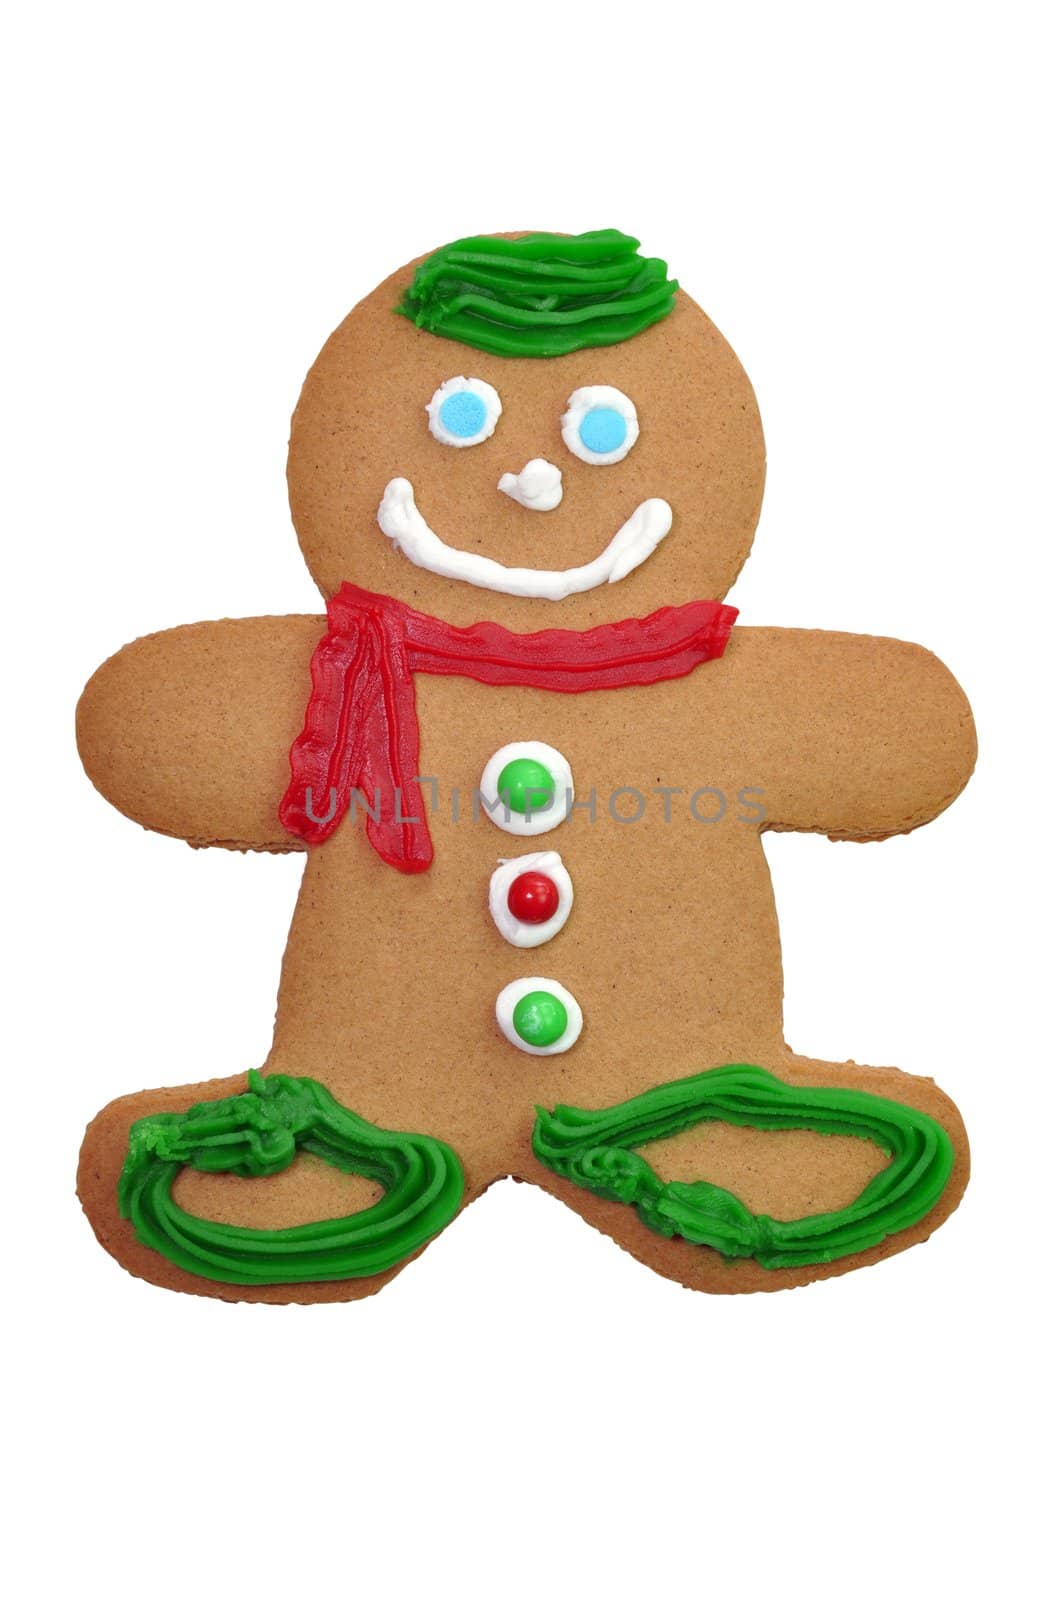 Decorated gingerbread cookie isolated on white background with clipping path.